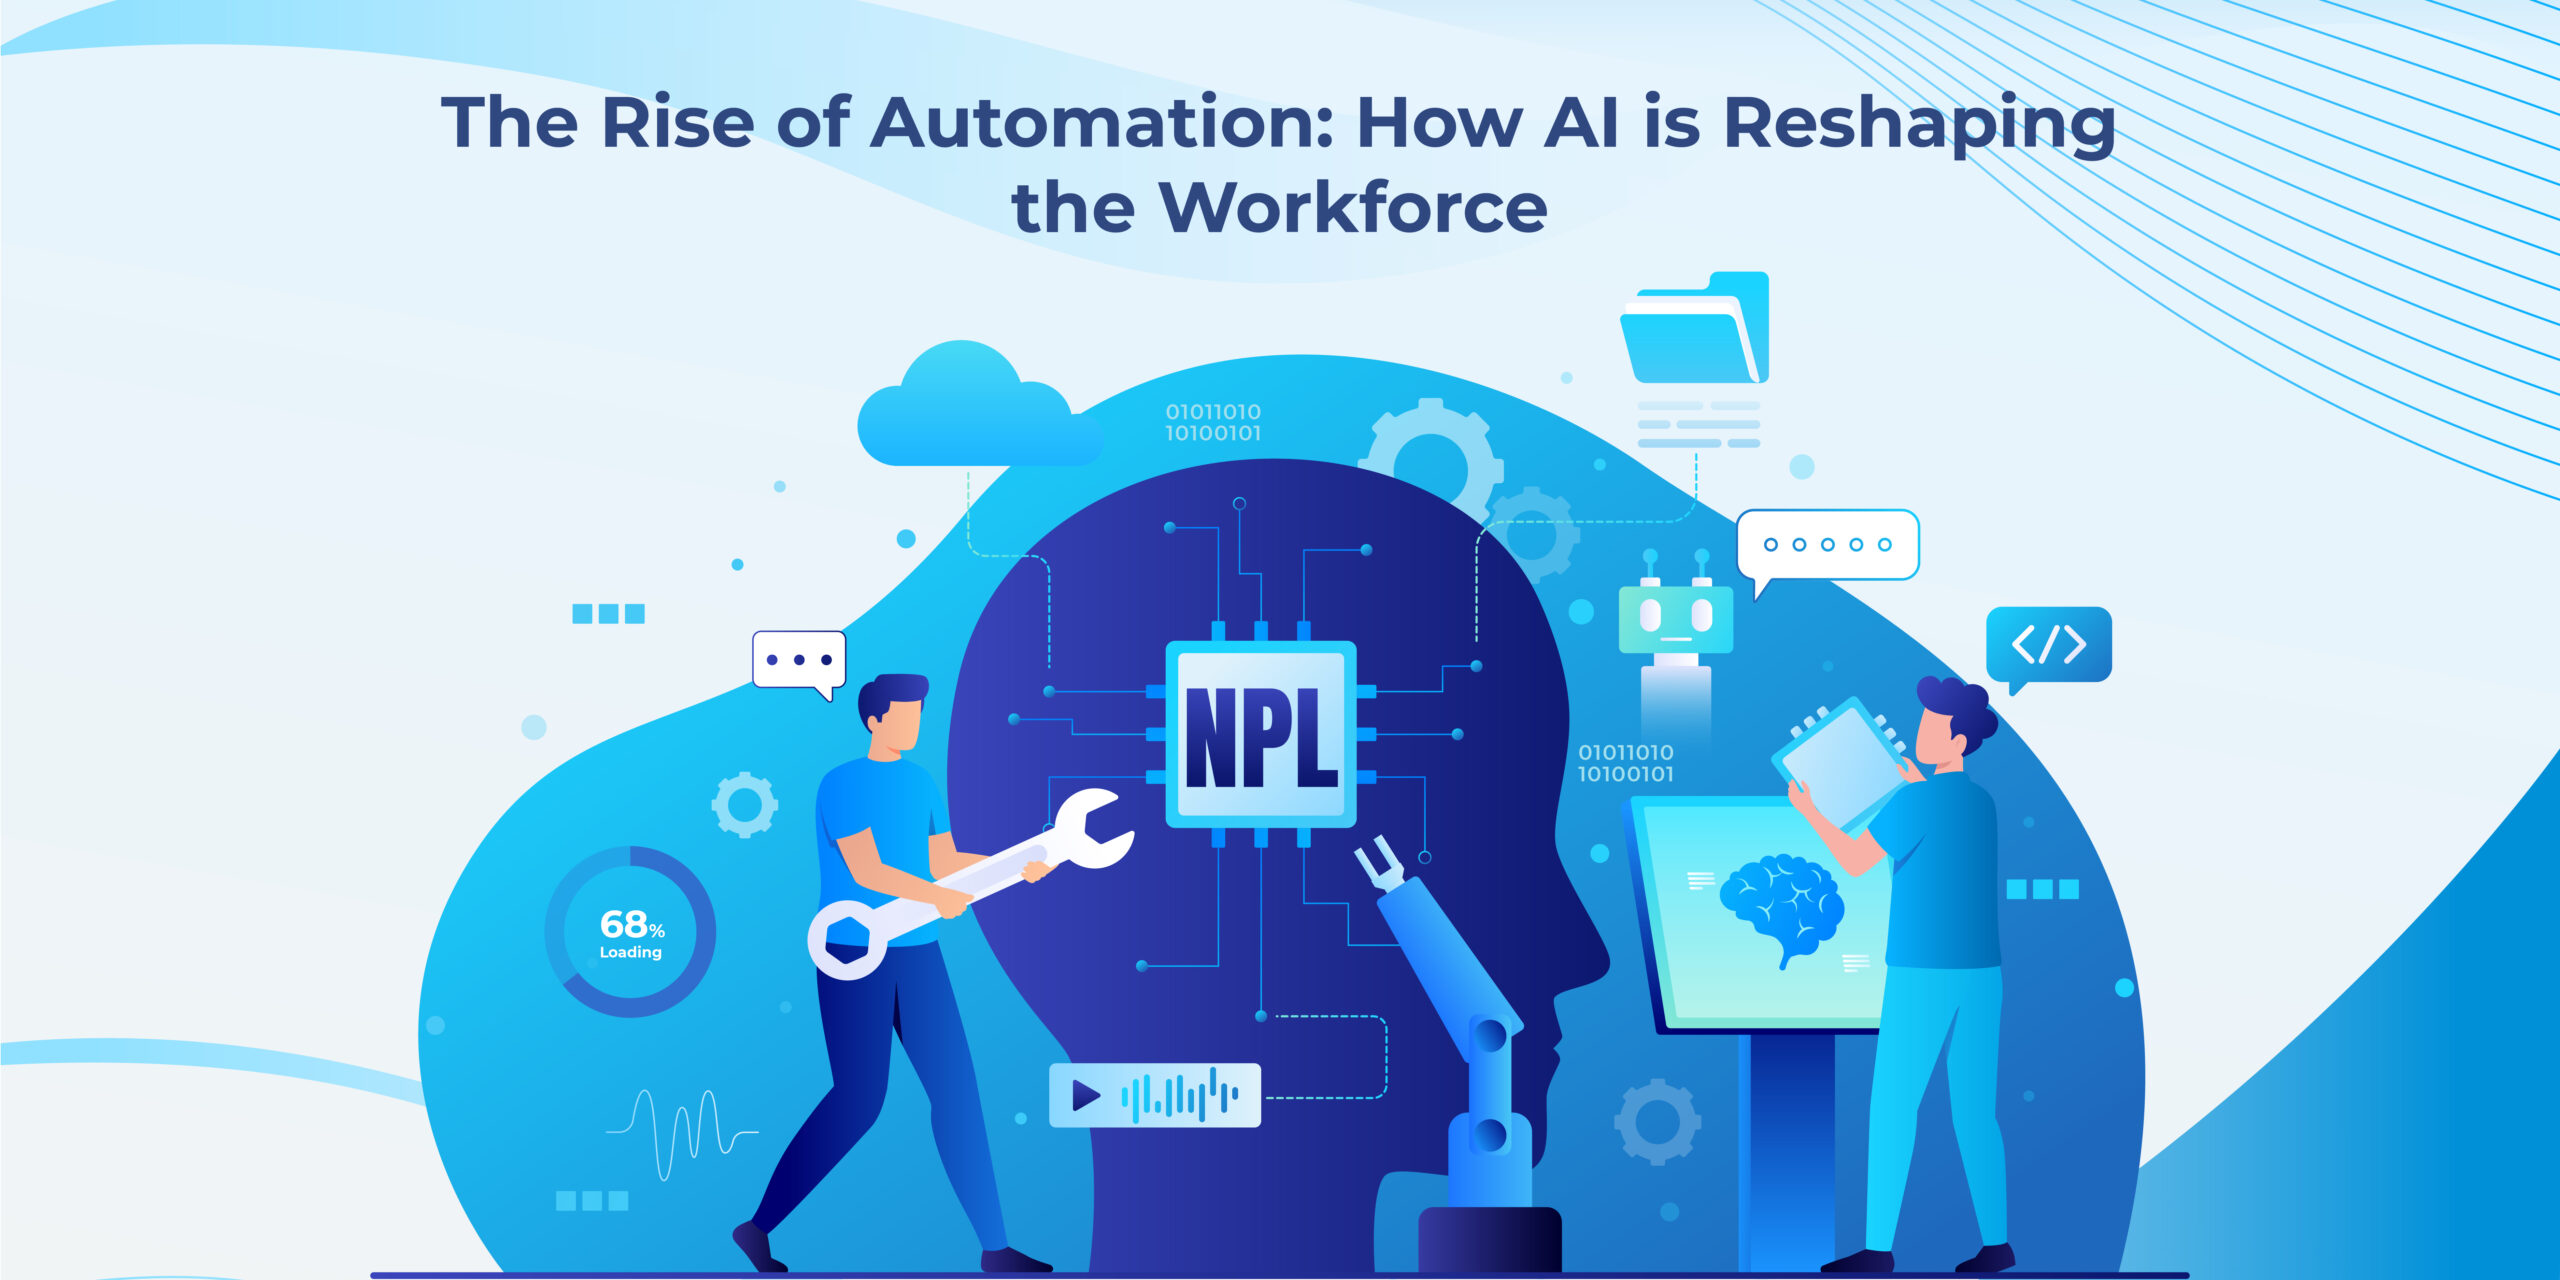 The Rise of Automation: How AI is Reshaping the Workforce